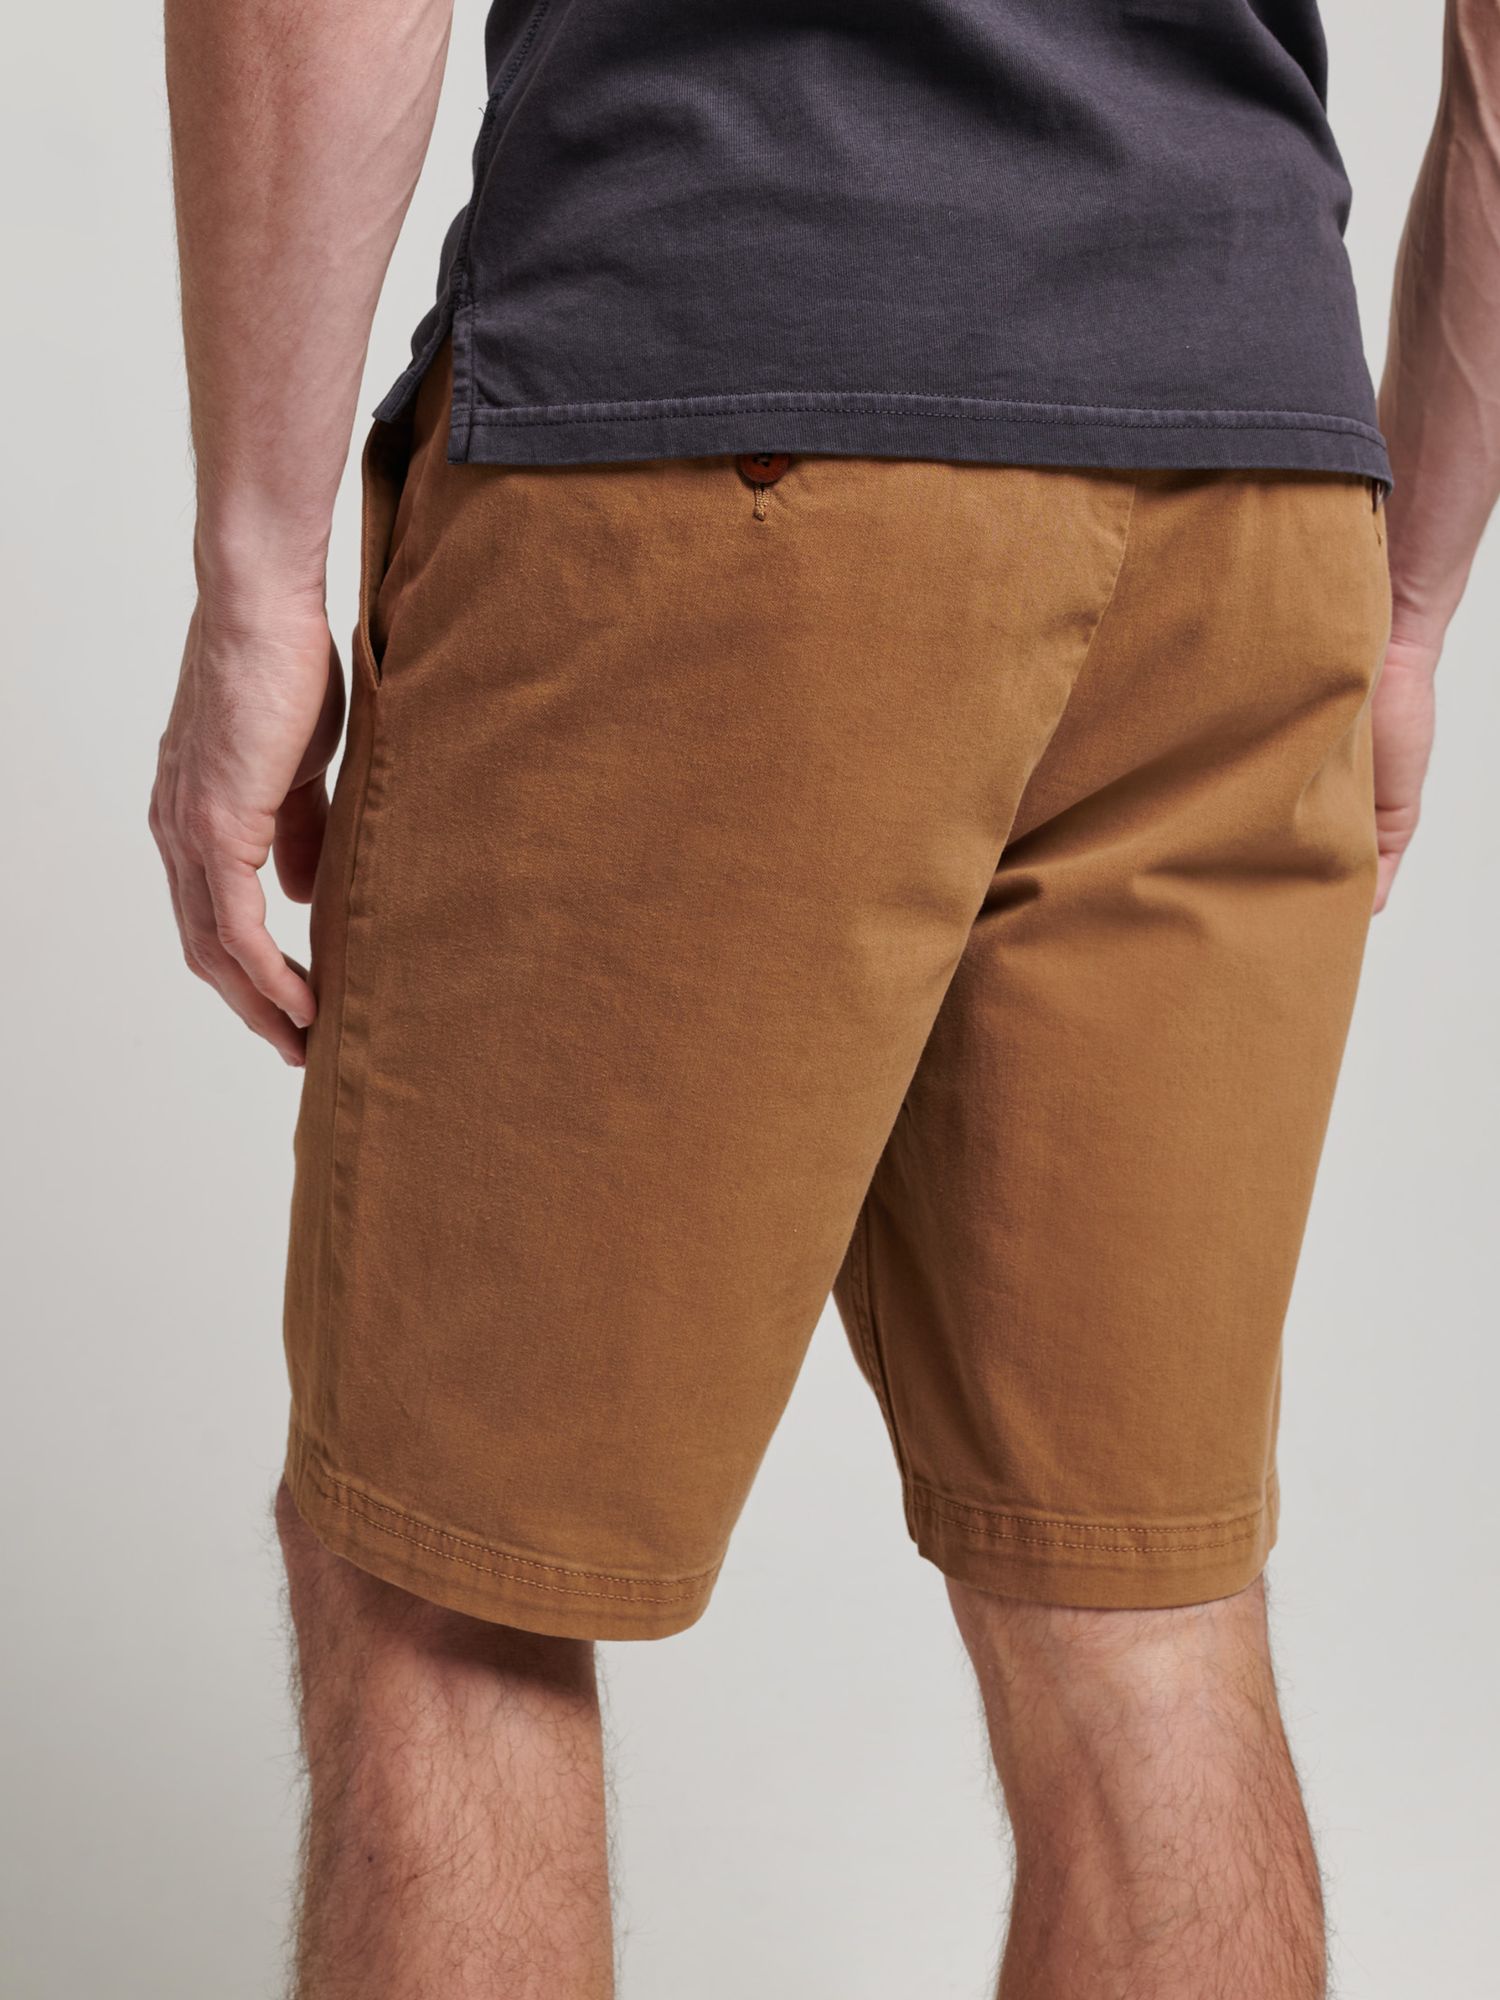 Superdry Officer Chino Shorts, Sandstone, 28R